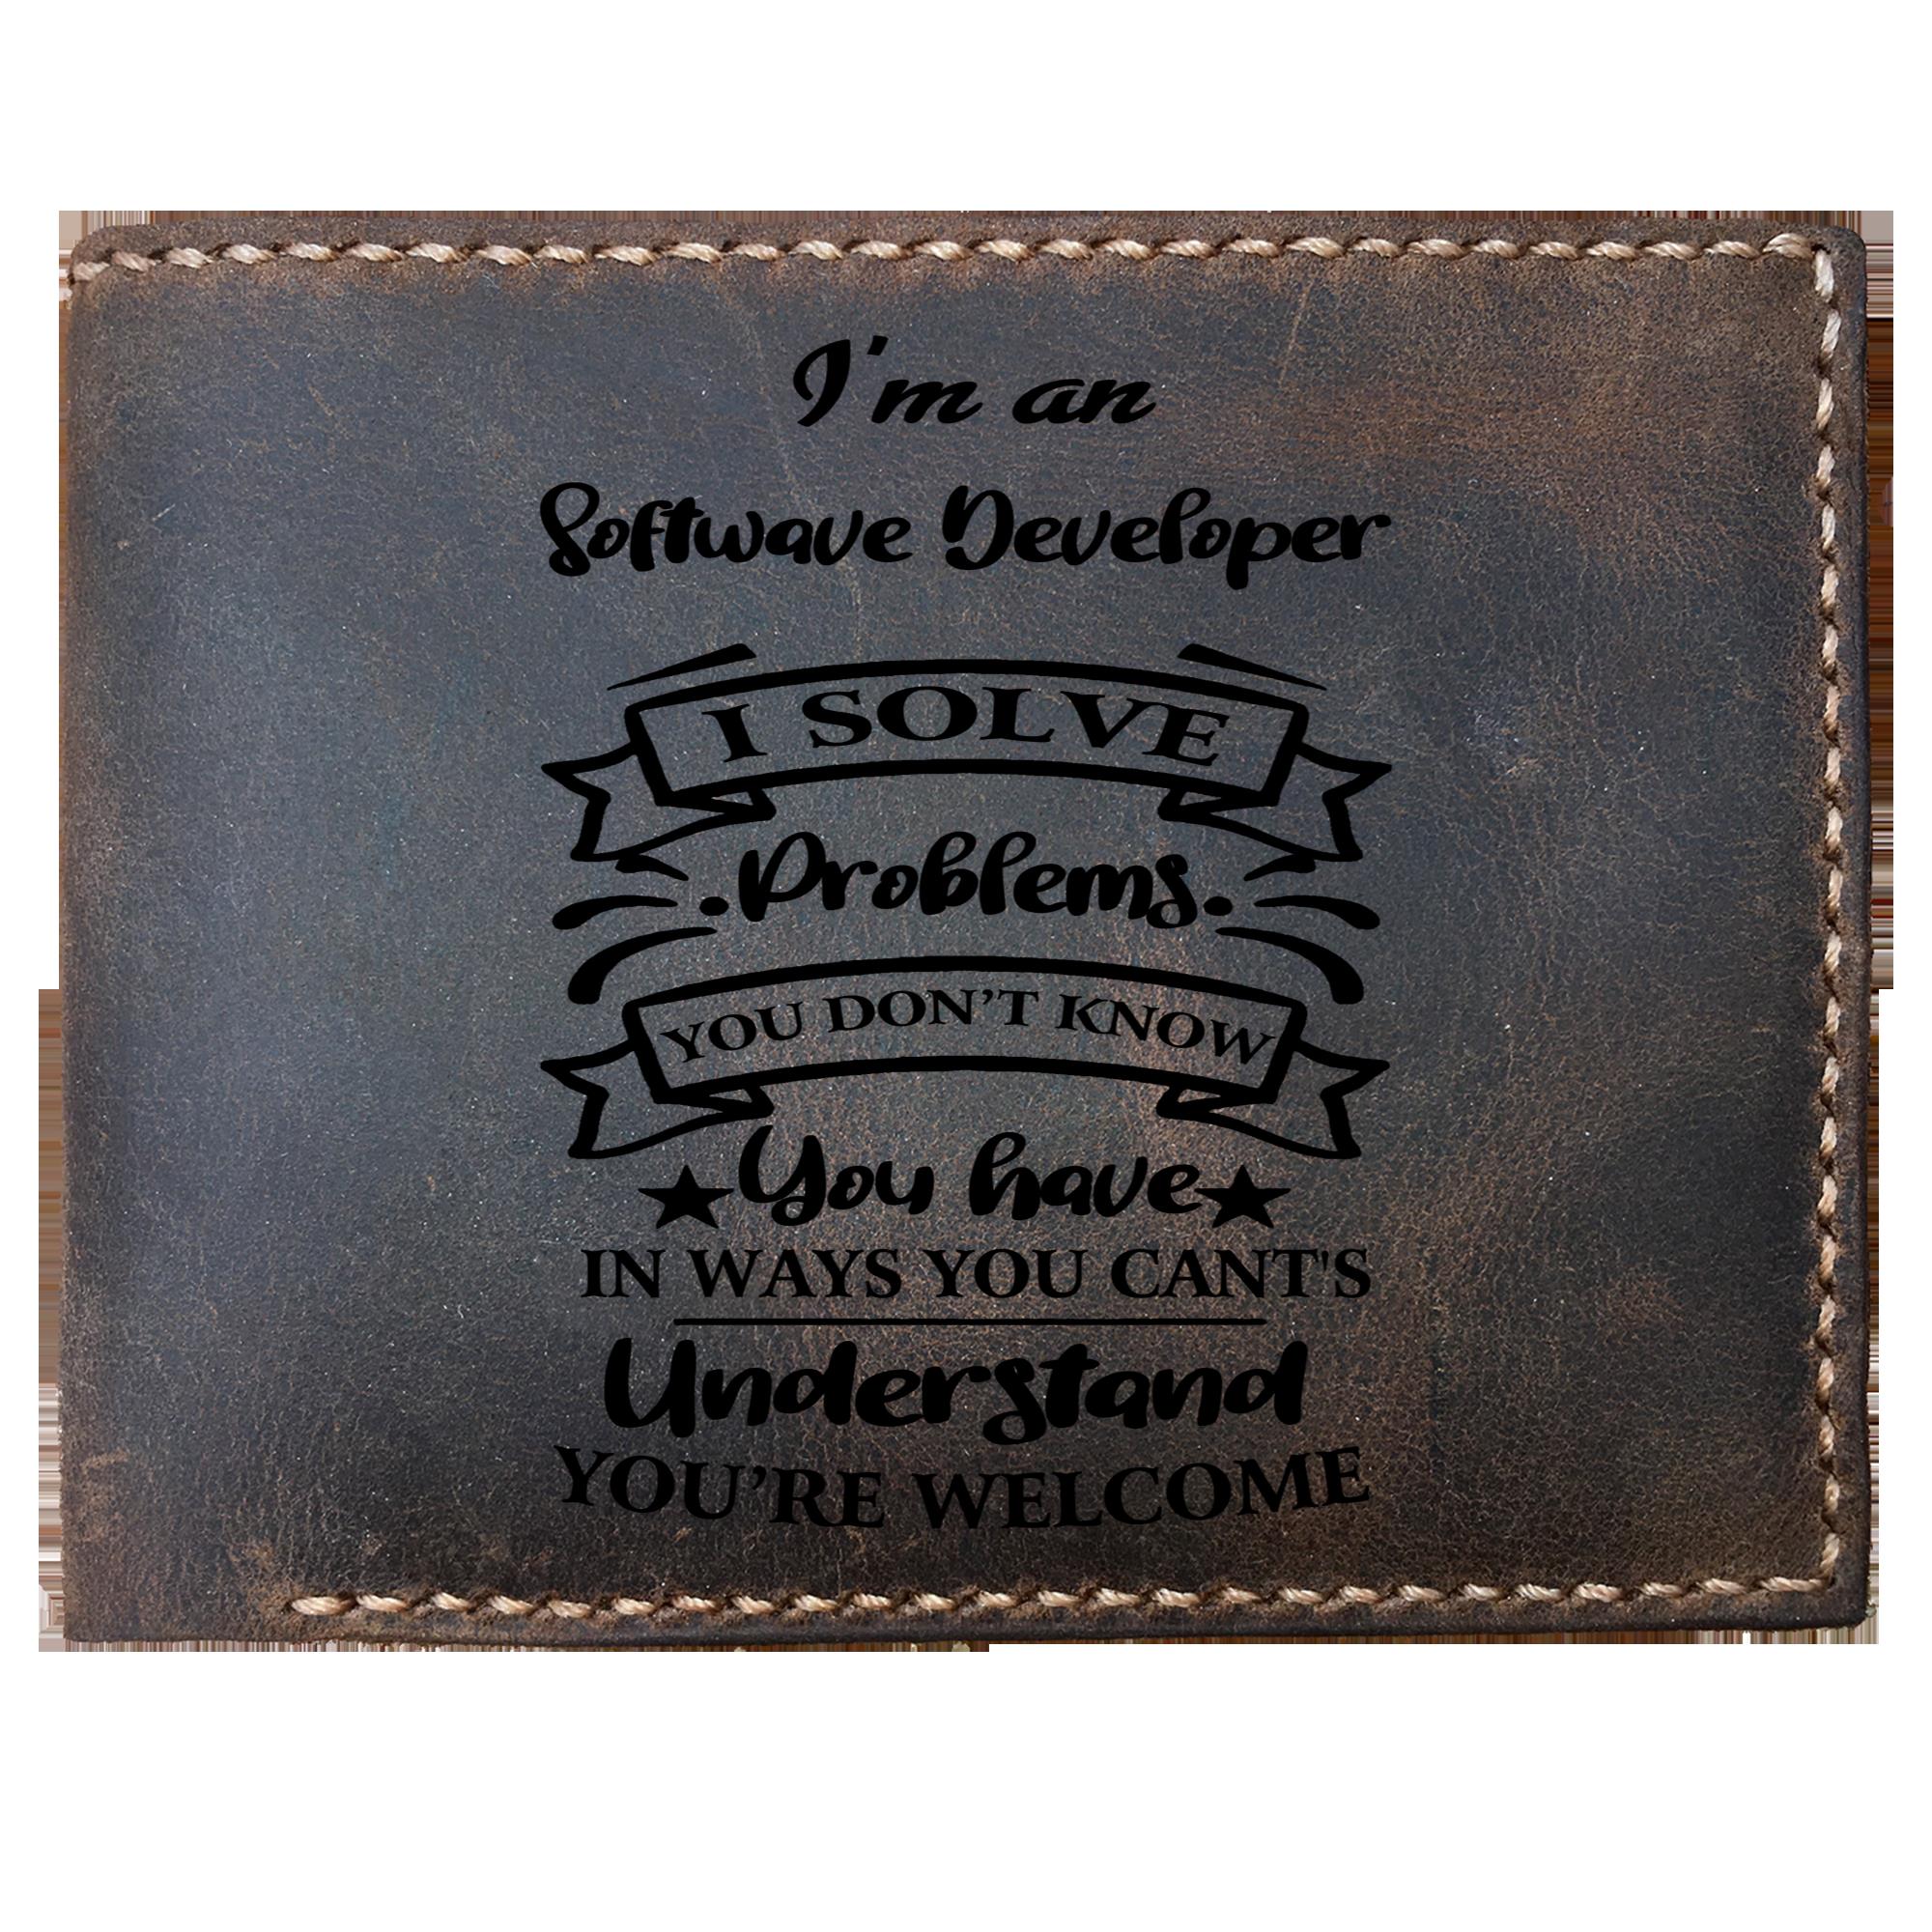 Skitongifts Funny Custom Laser Engraved Bifold Leather Wallet For Men, I'm an Softwave Developer Solve Problems, Father's Day Gifts